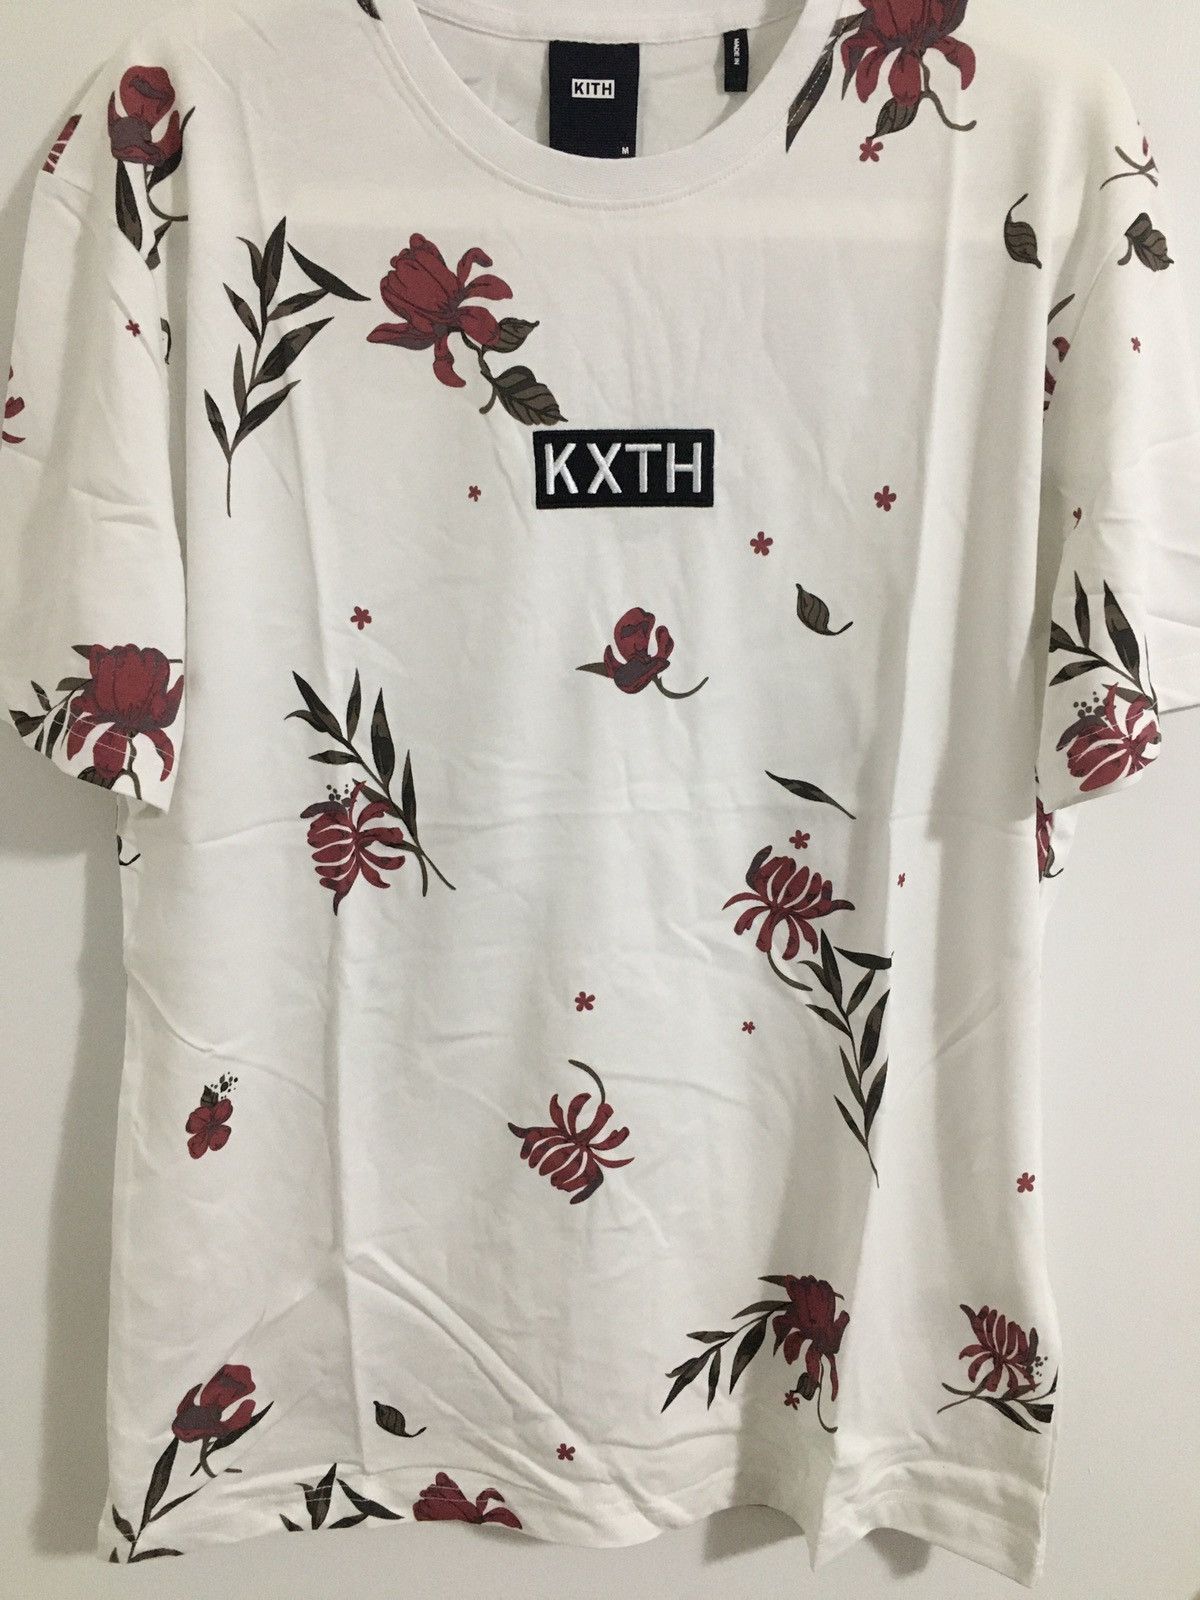 Kith KXTH 10th Anniversory Summer Floral Tee | Grailed